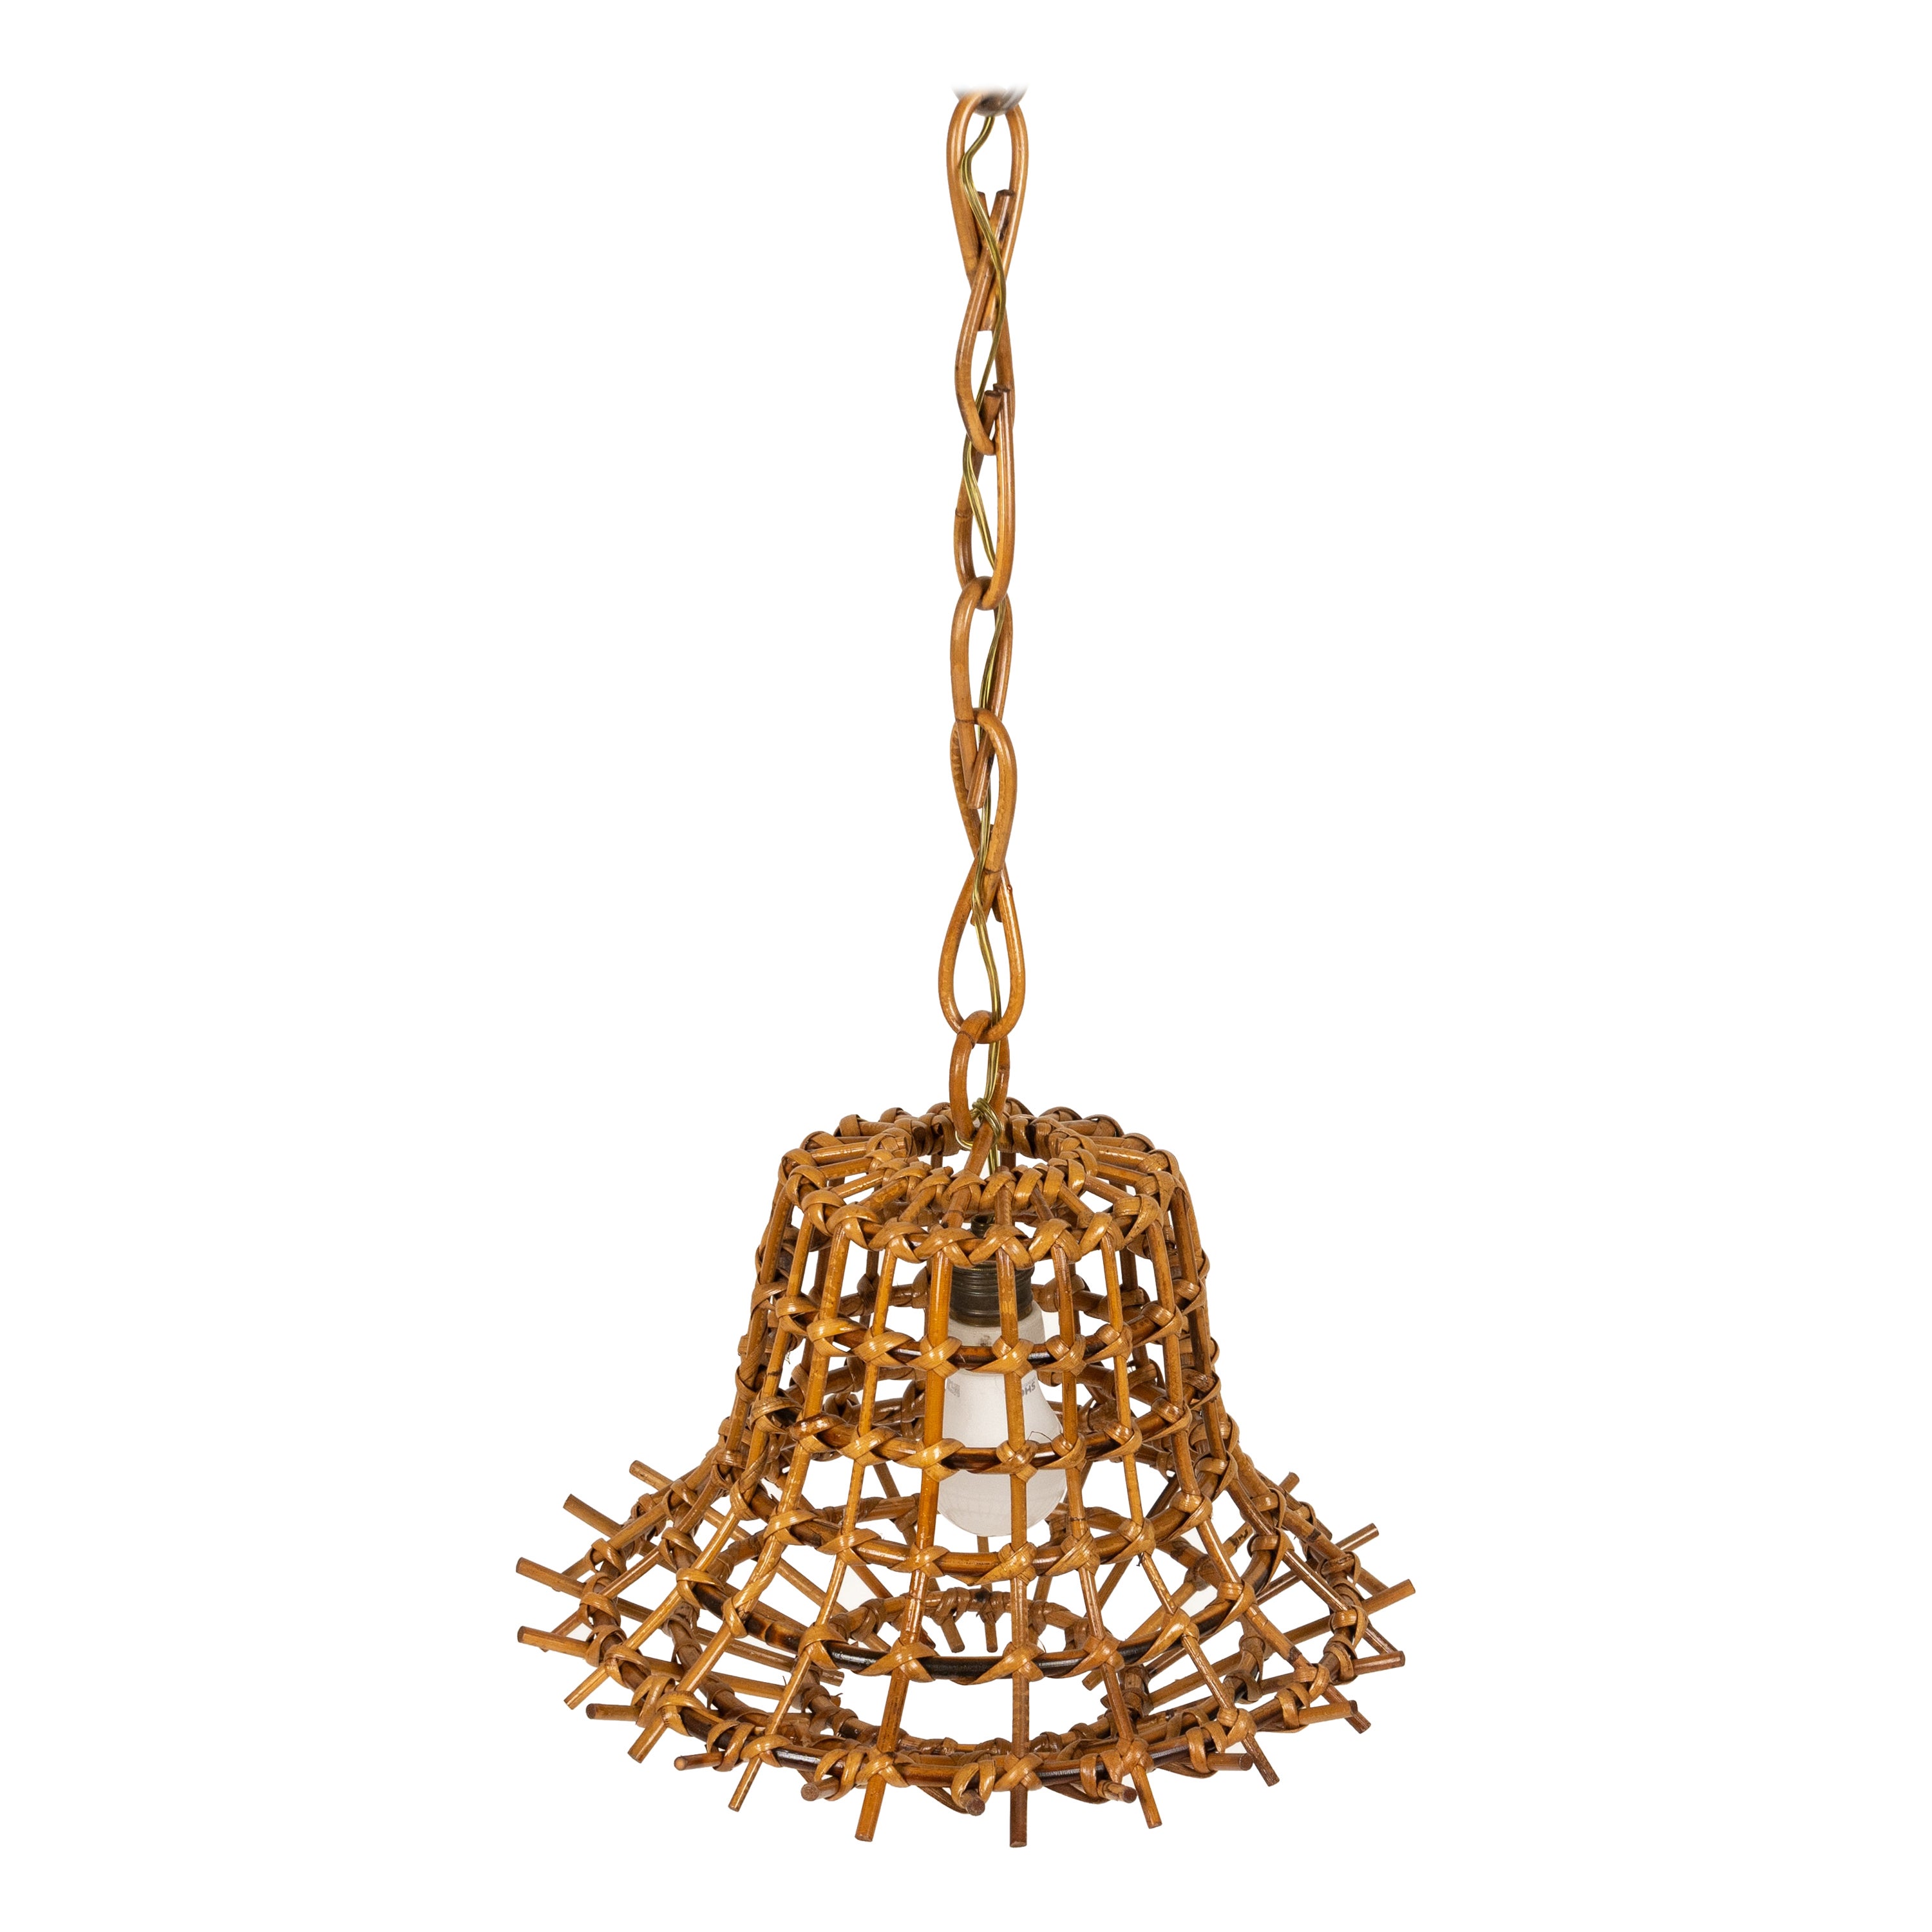 Midcentury Rattan & Bamboo Chandelier "Lantern" Louis Sognot Style, Italy 1960s For Sale